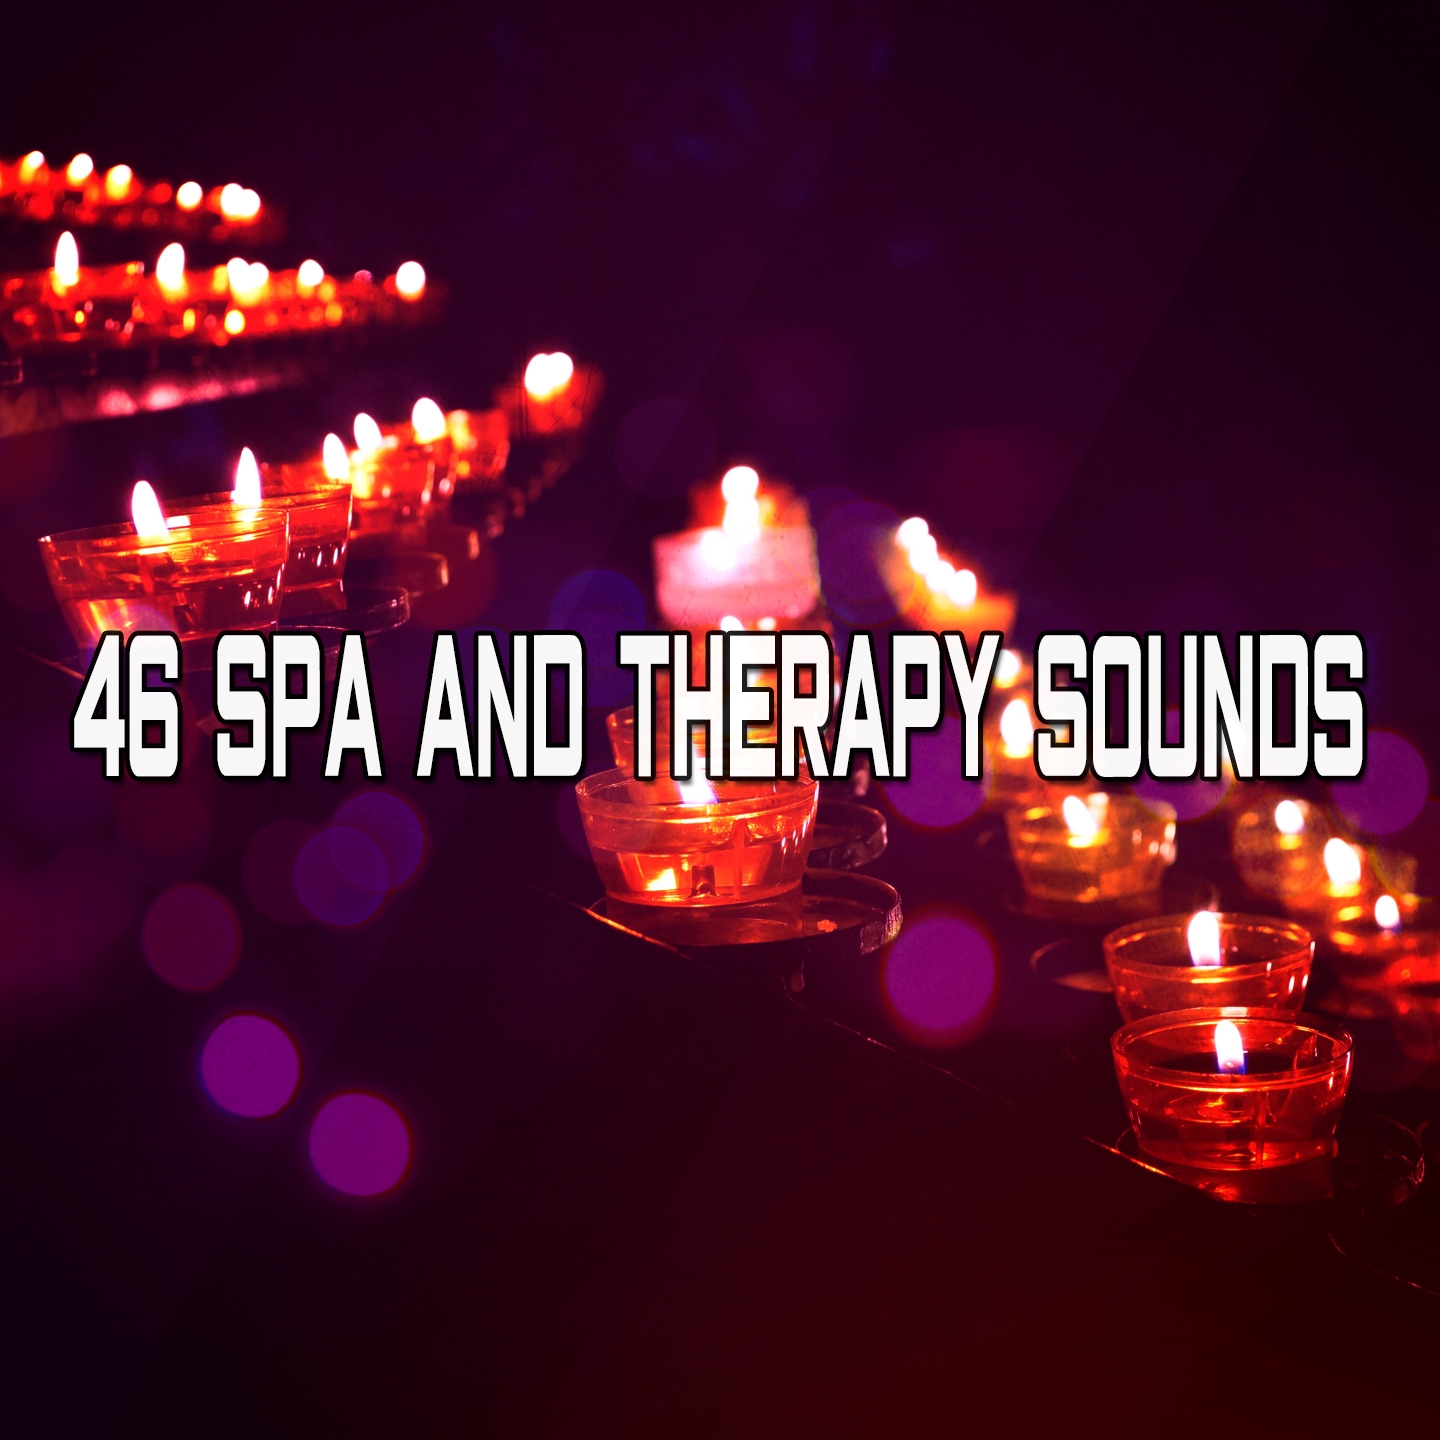 46 Spa And Therapy Sounds